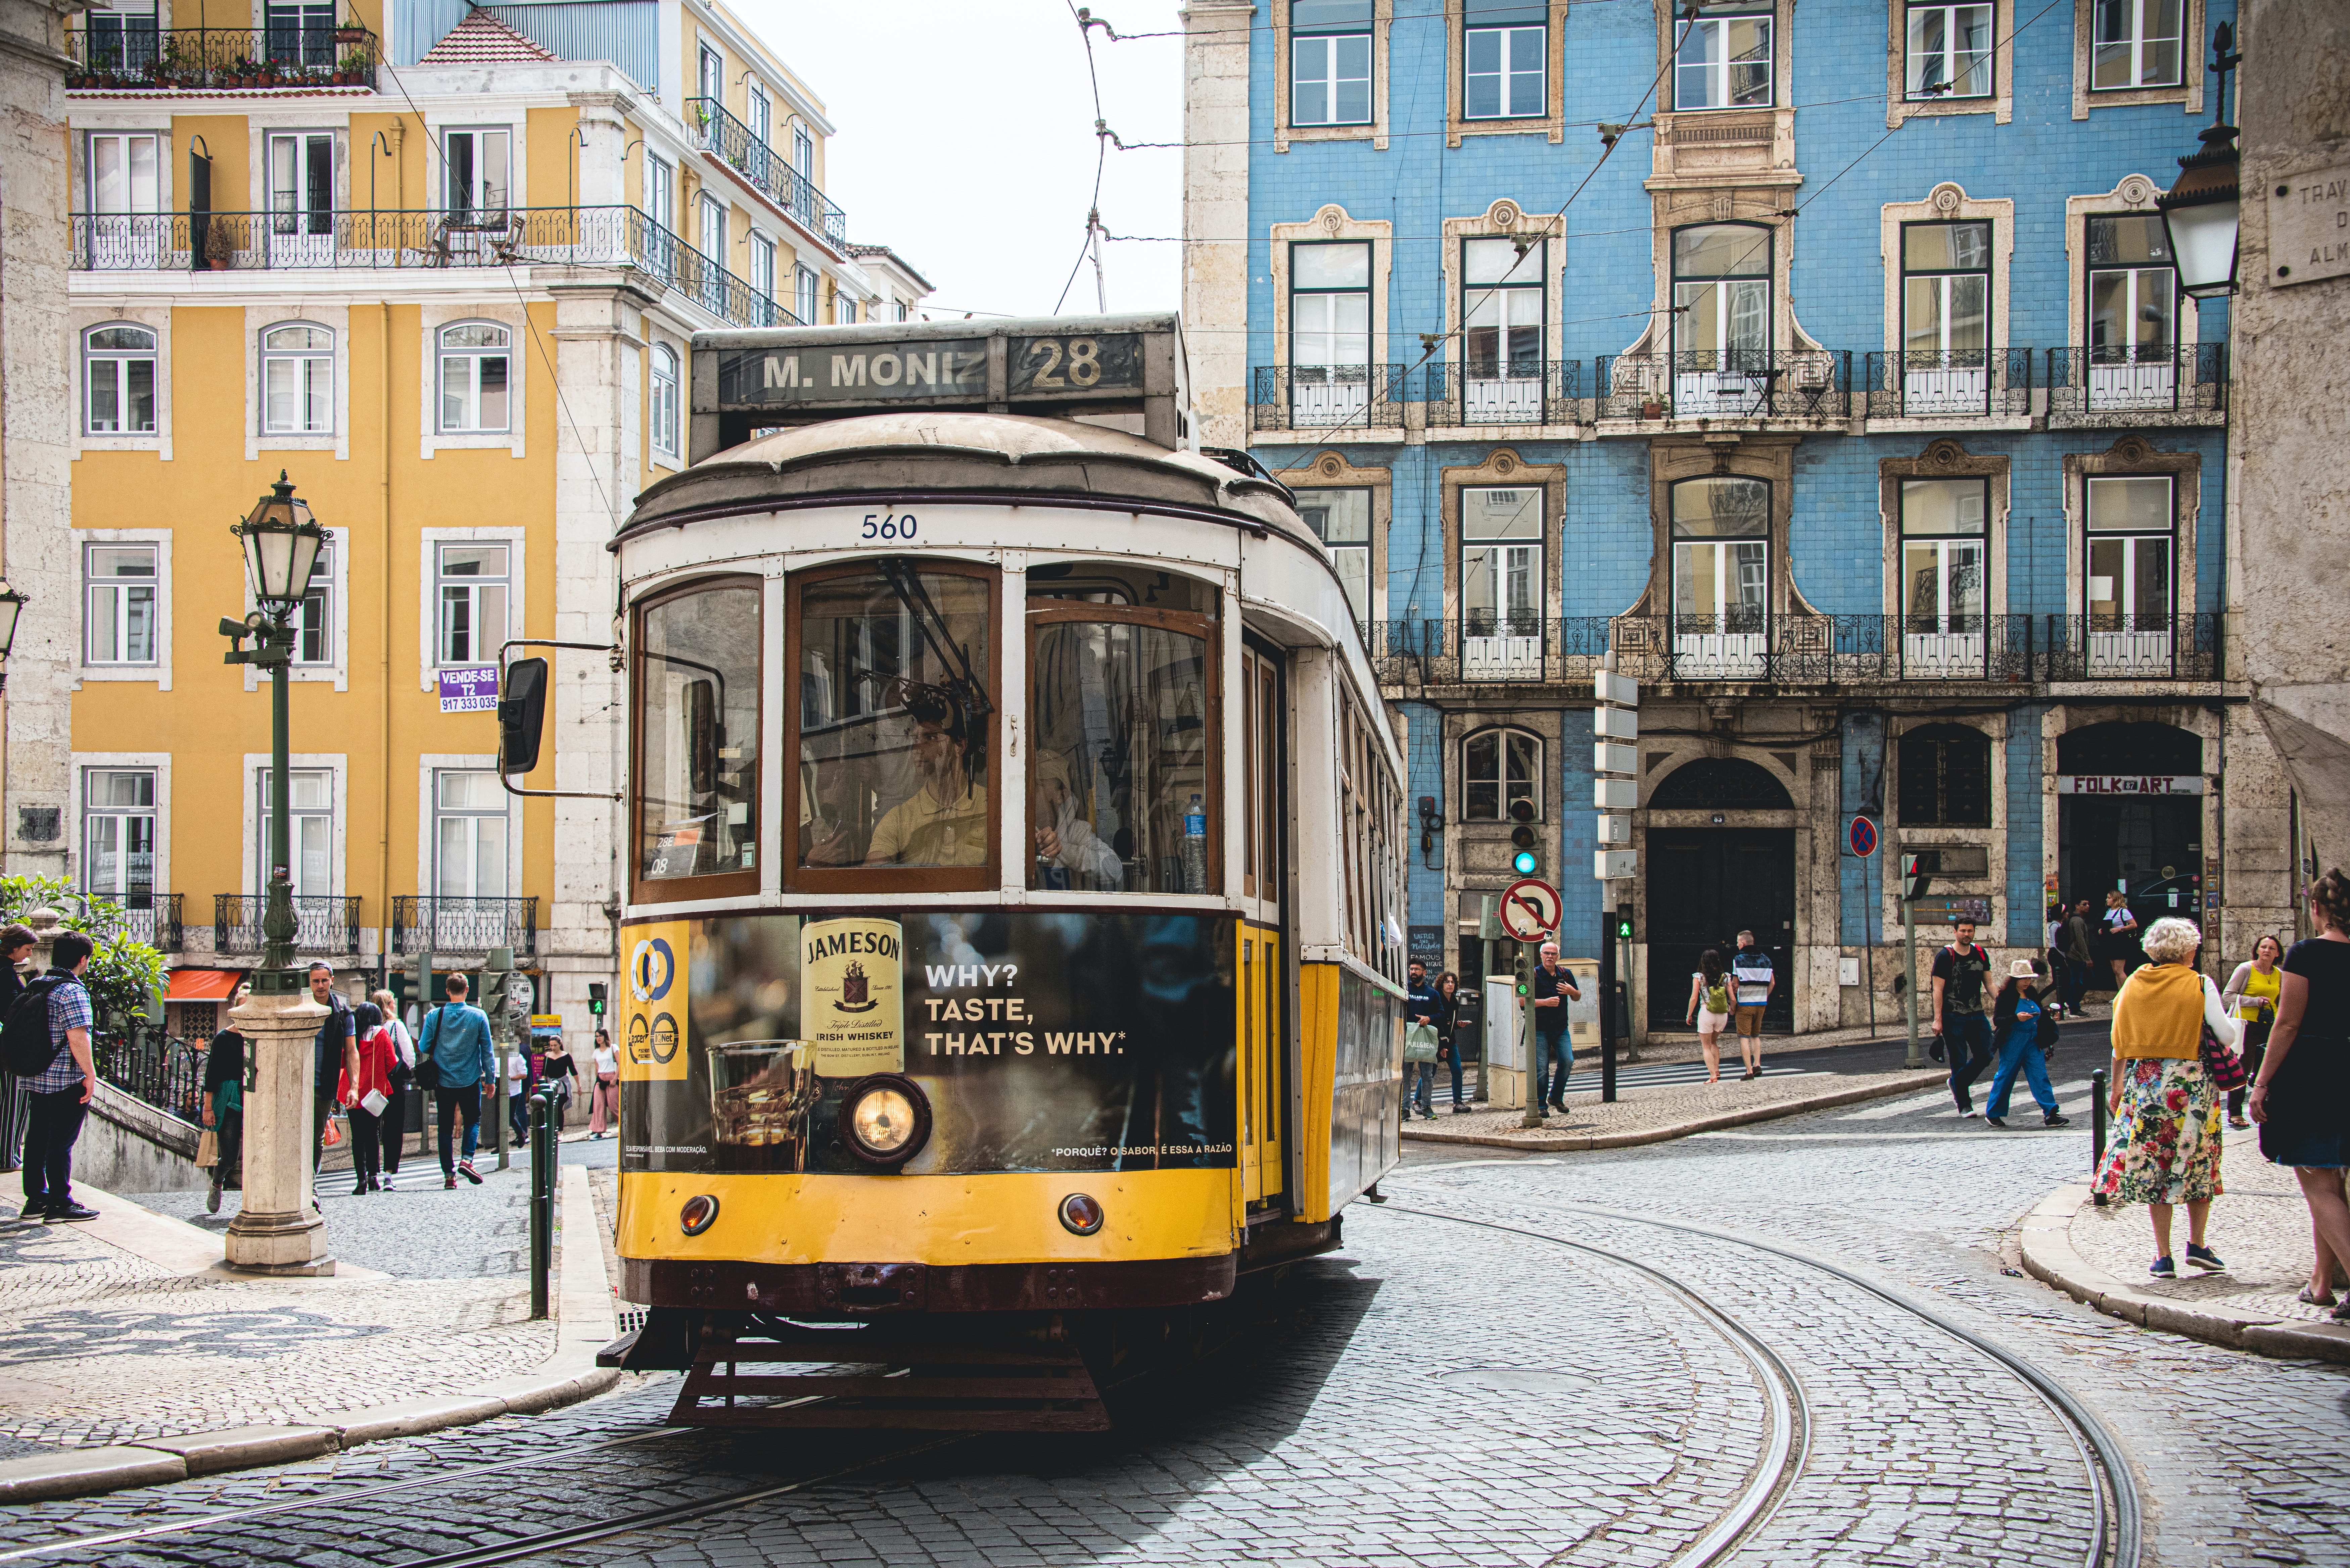 A old tram in the colorful streets of Portugal